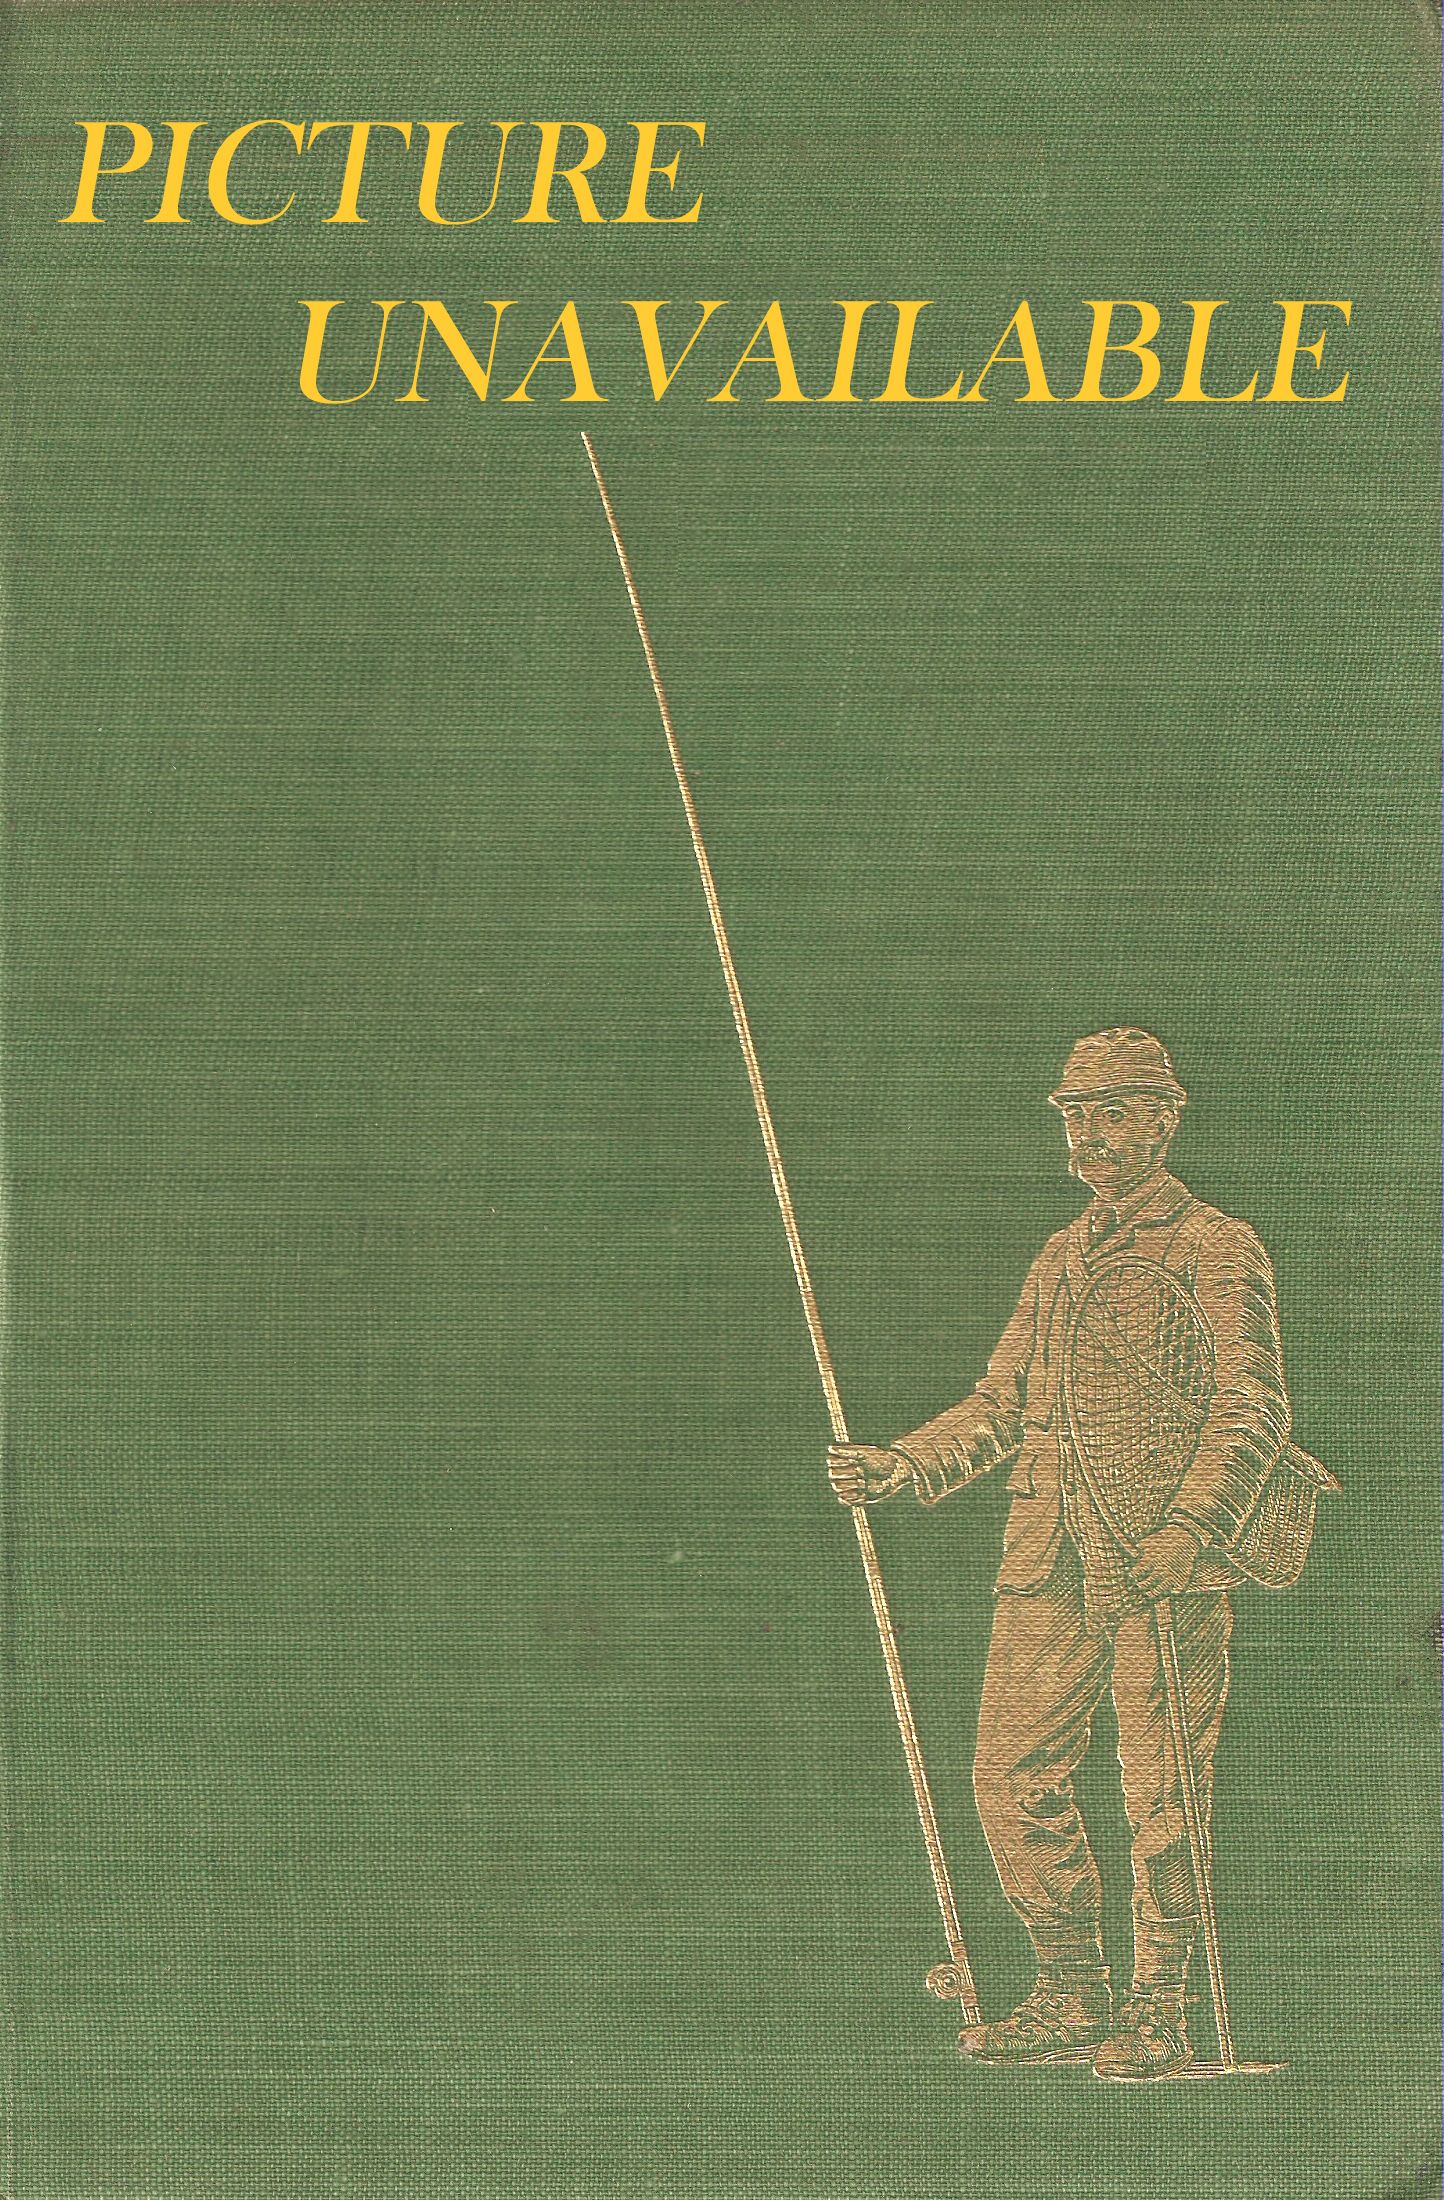 NEWNES COMPLETE GUIDE TO SEA ANGLING. Edited and compiled by Alan  Wrangles. Illustrated by David Carl Forbes.